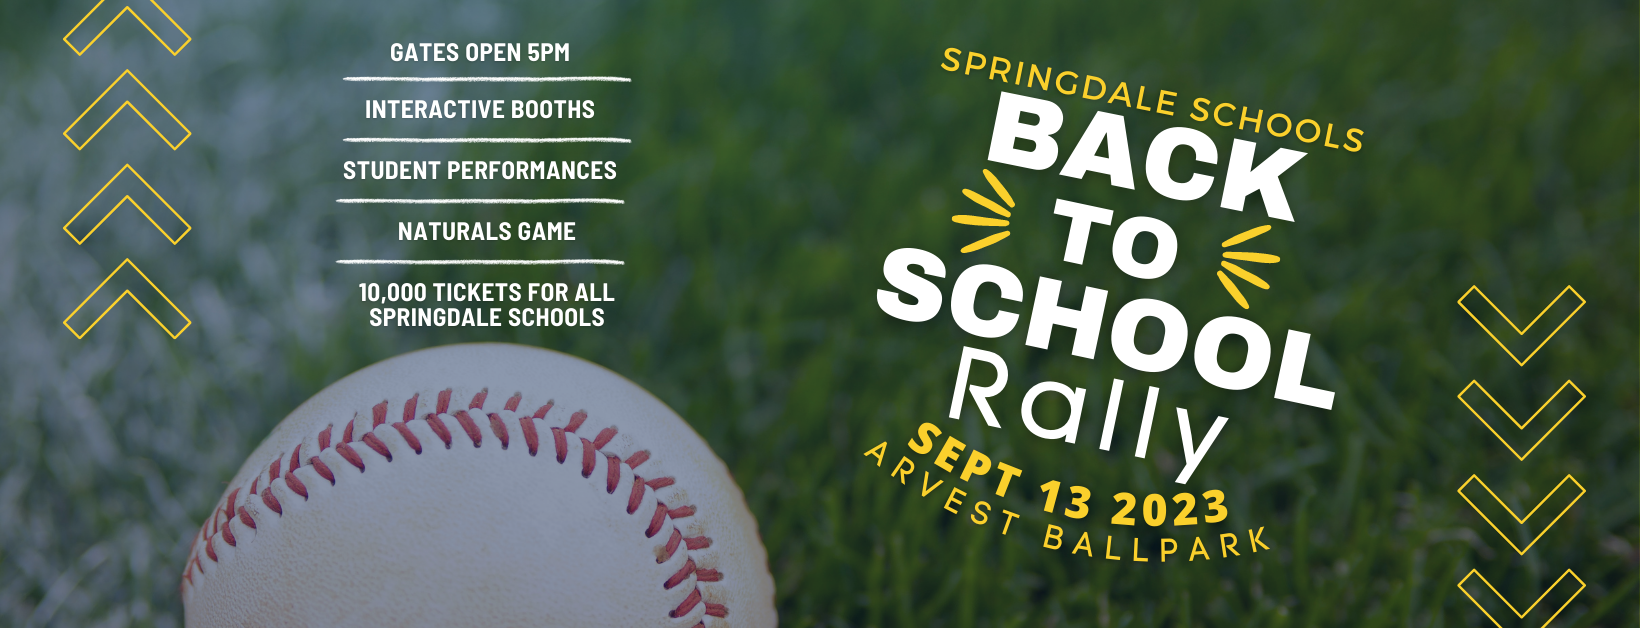 Springdale District Back to School Rally September 13, 2023